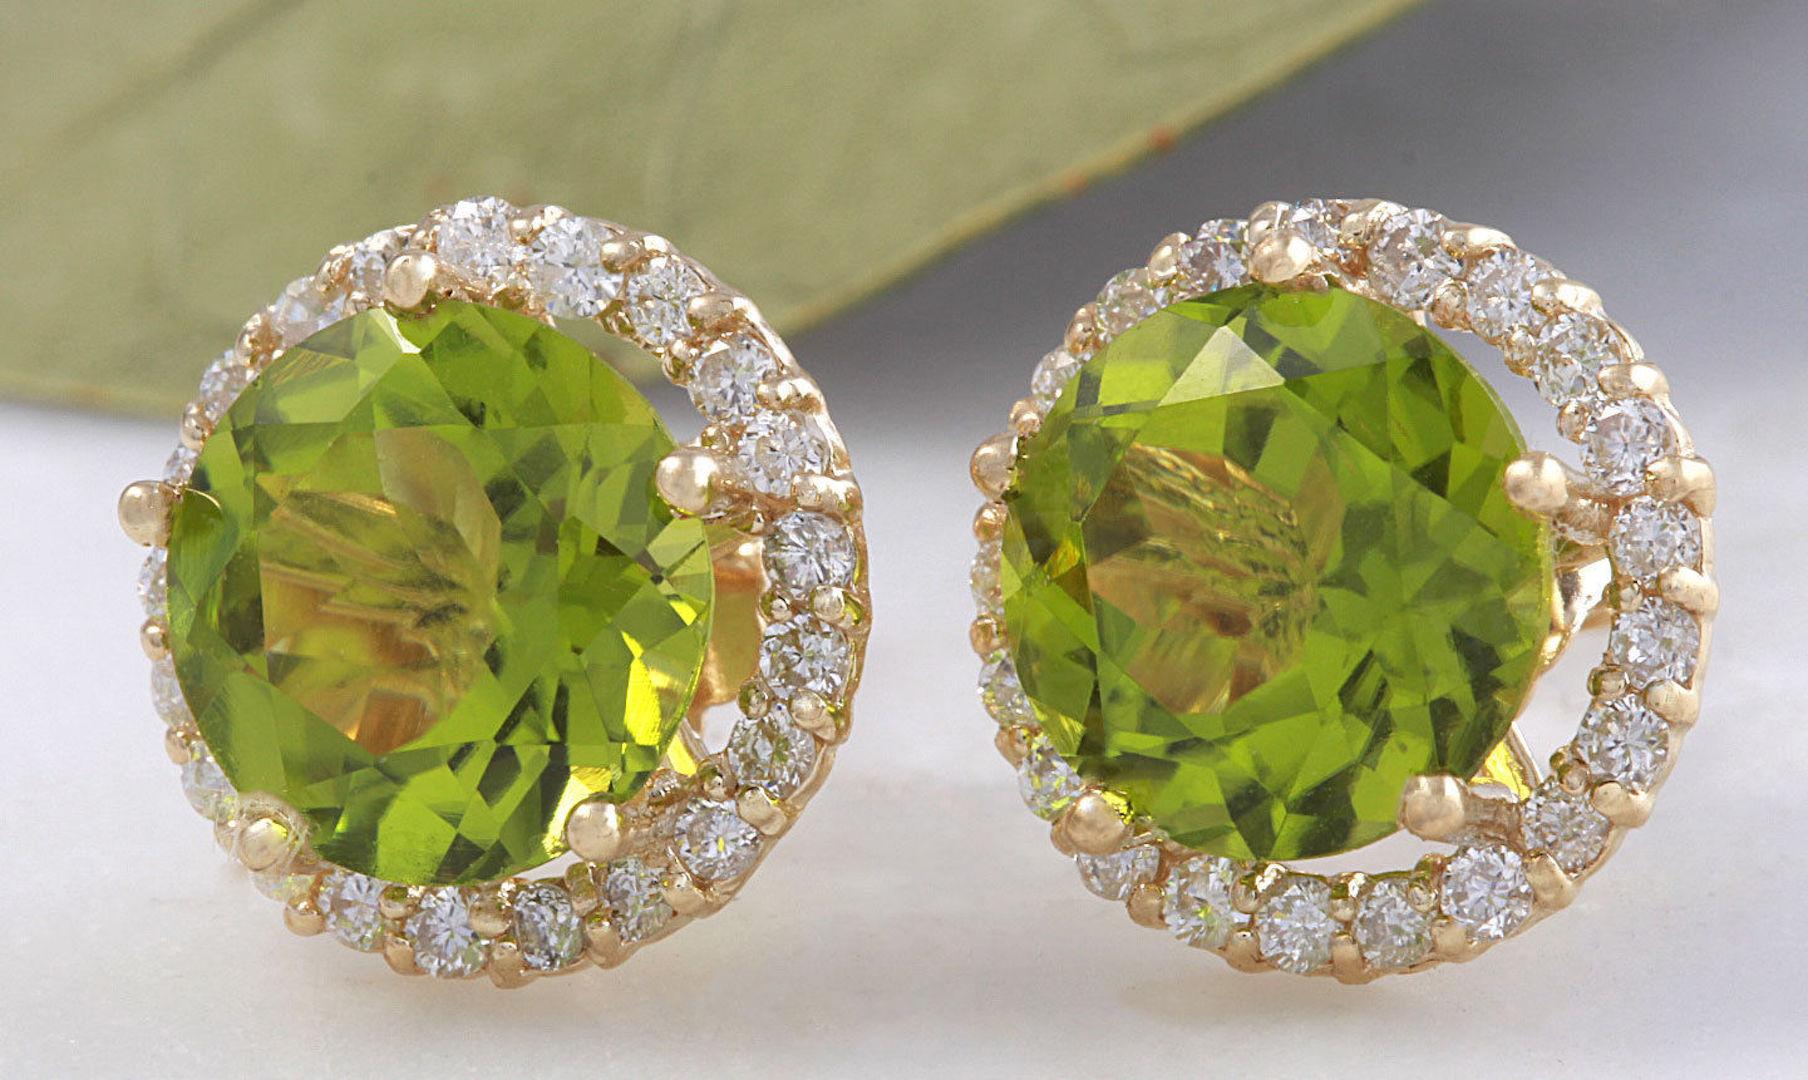 Exquisite 6.12 Carats Natural Green Peridot and Diamond 14K Solid Yellow Gold Stud Earrings

Amazing looking piece!

Total Natural Round Cut White Diamonds Weight: .60 Carats (color G-H / Clarity SI1-SI2)

Total Natural Round Cut Green Peridots